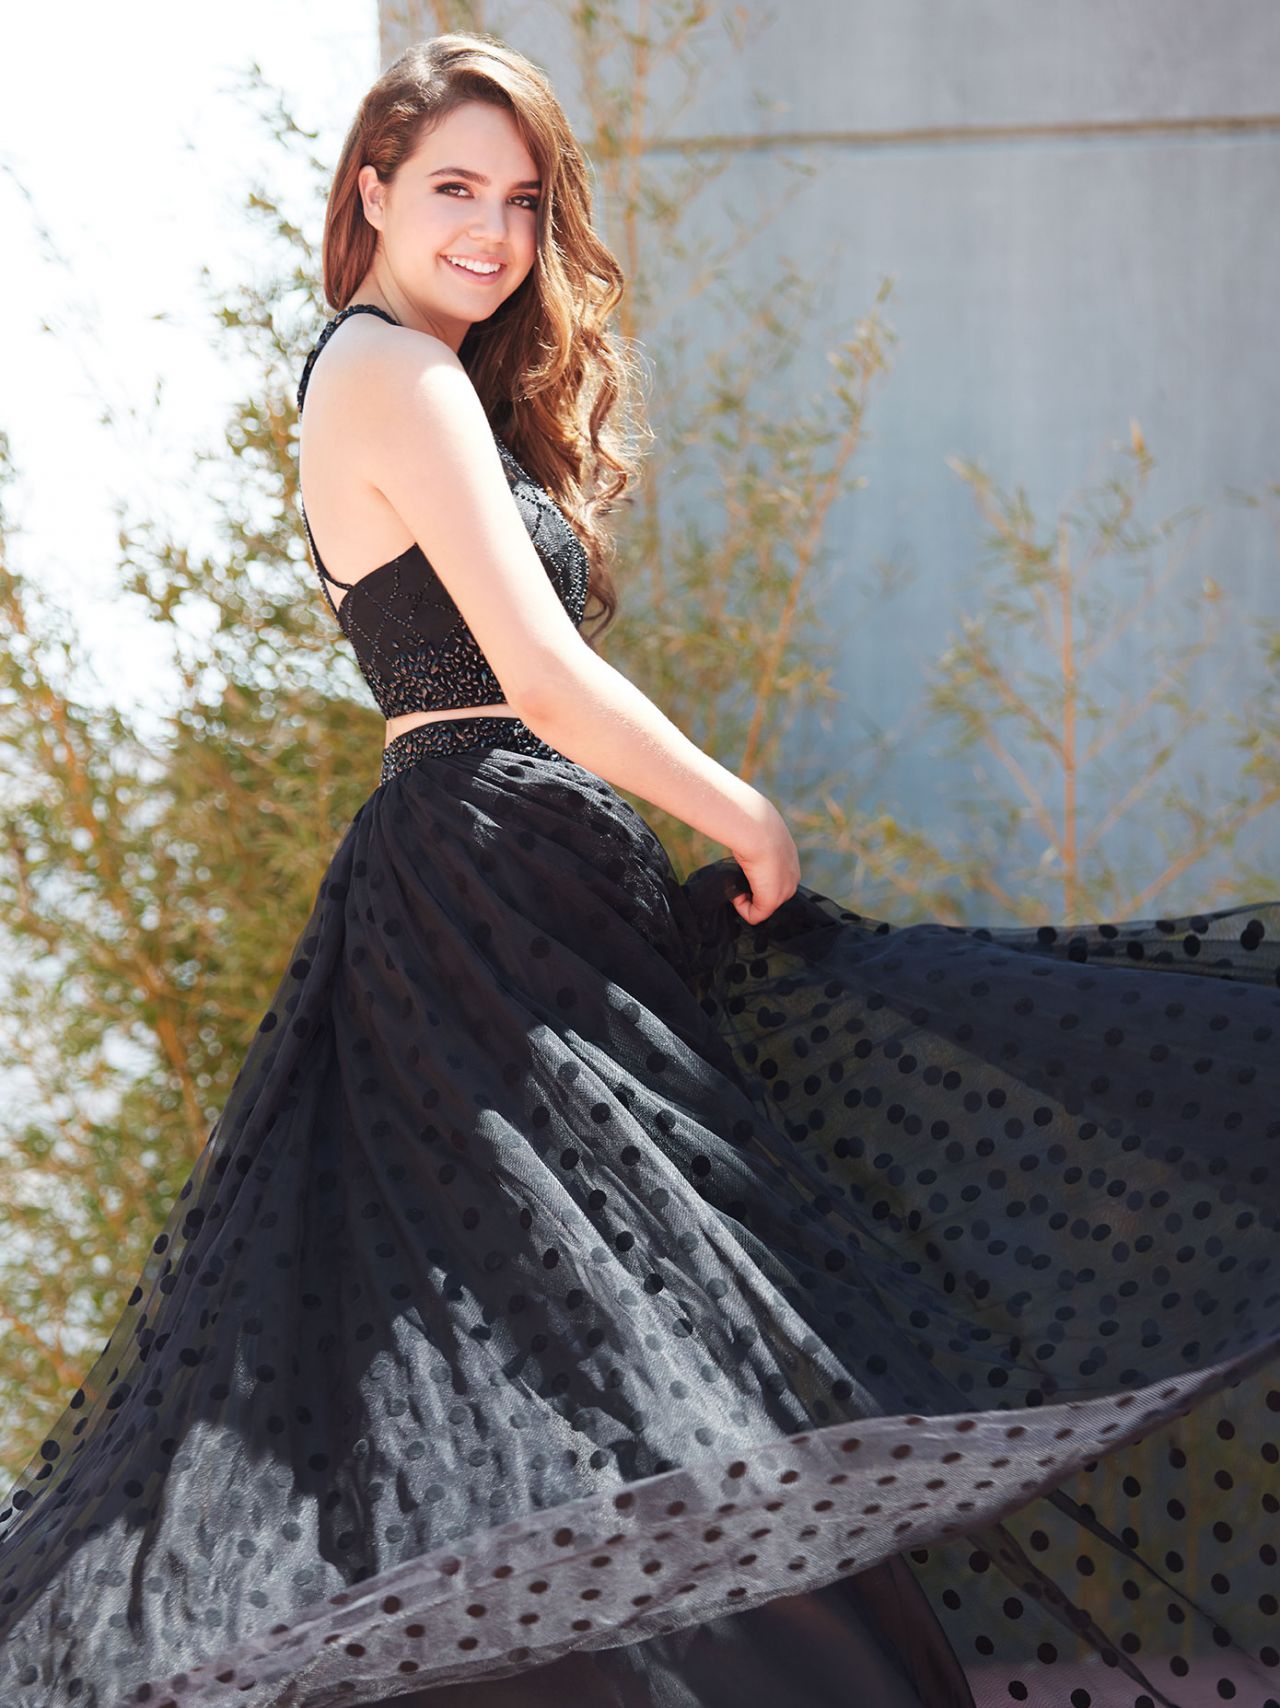 http://www.theplace.ru/archive/bailee_madison/img/4(102).jpg